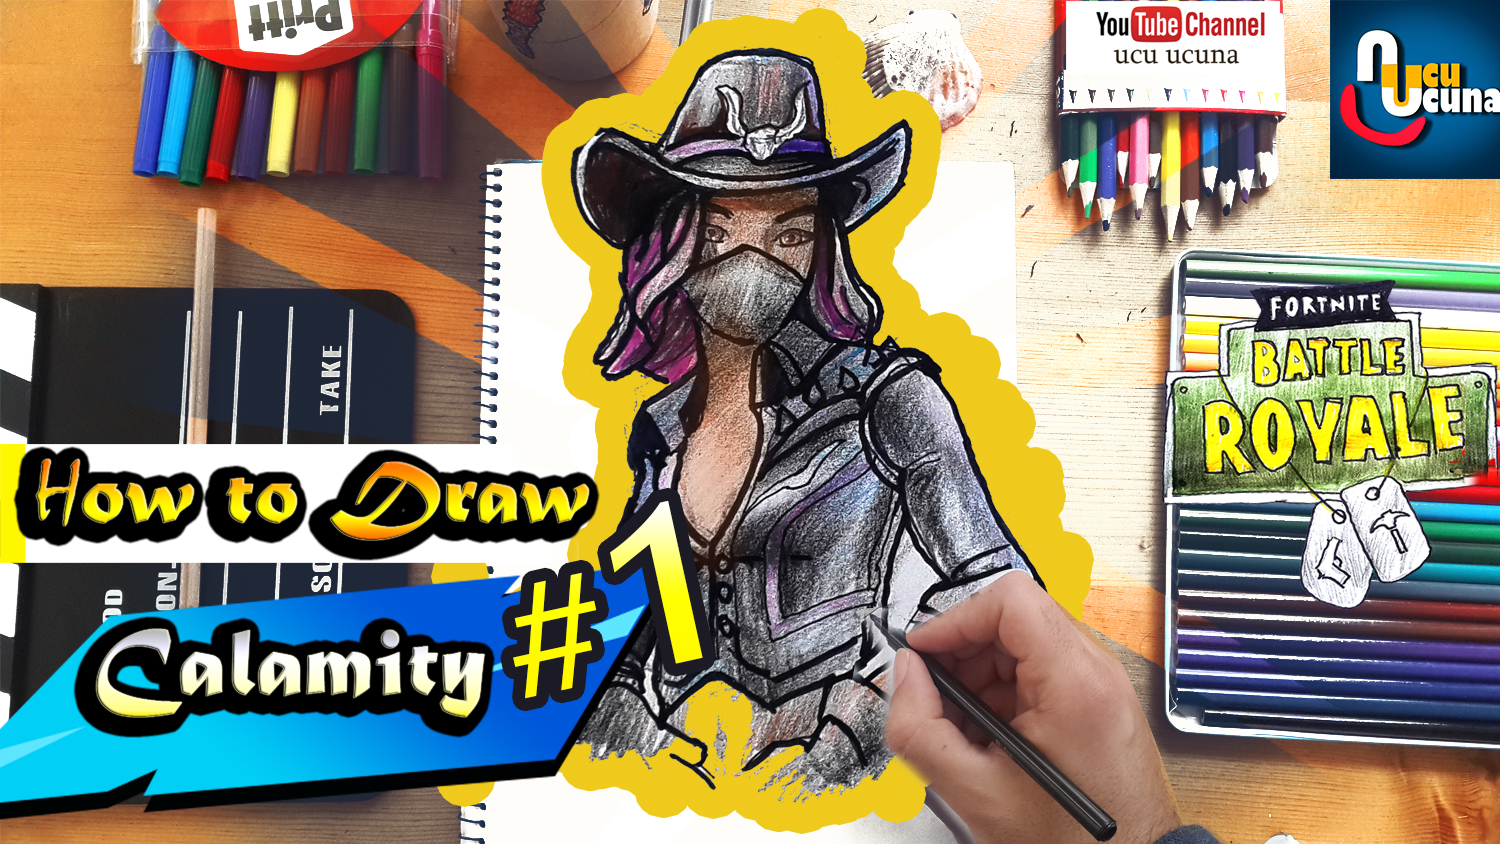 How to draw calamity tutorial youtube channel name is ucu ucuna Learn how to draw love ranger from Fortnite Step by step beginner drawing tutorial of the calamity skin in Fortnite.